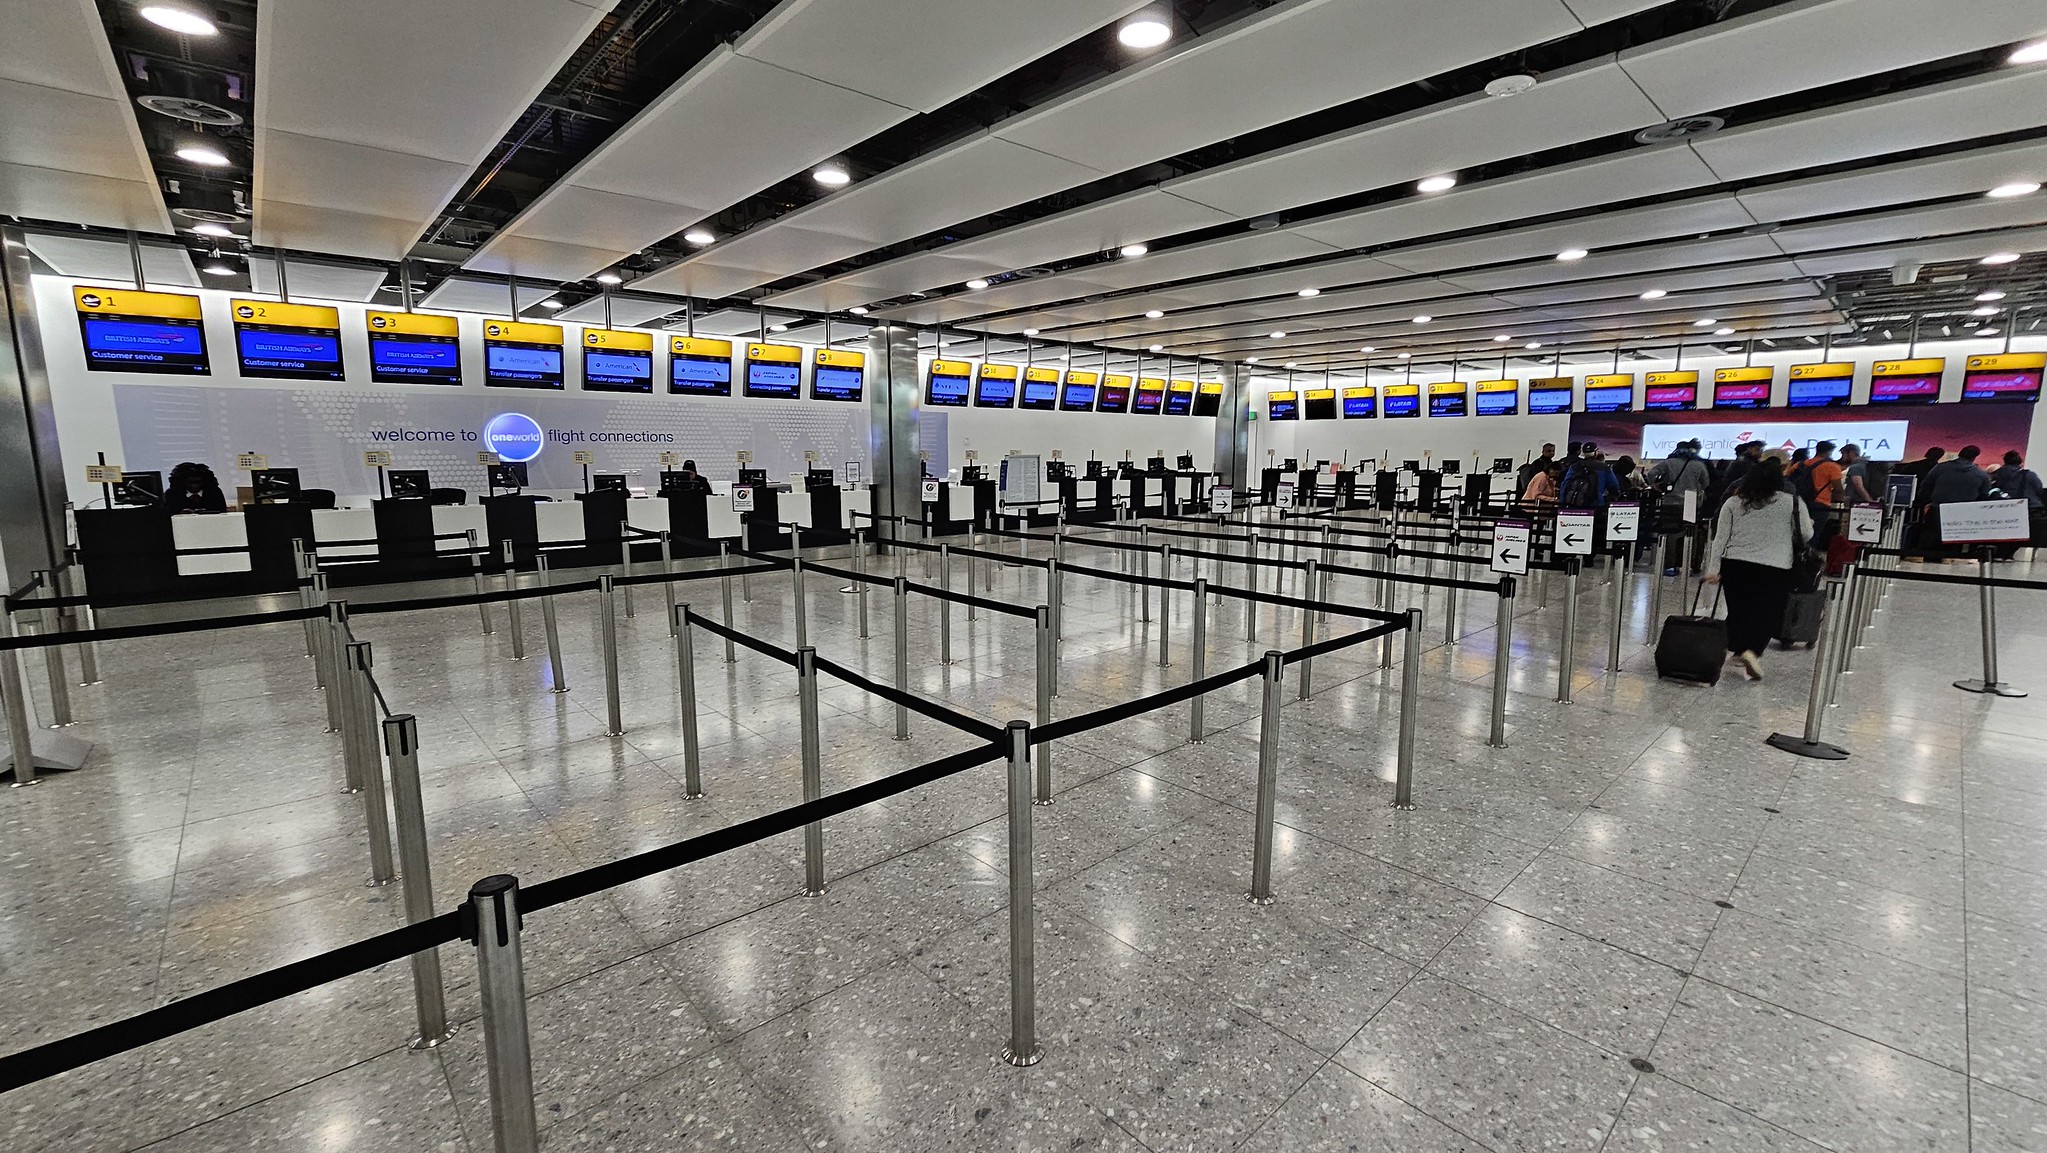 The airline ticket counter at T3 airside